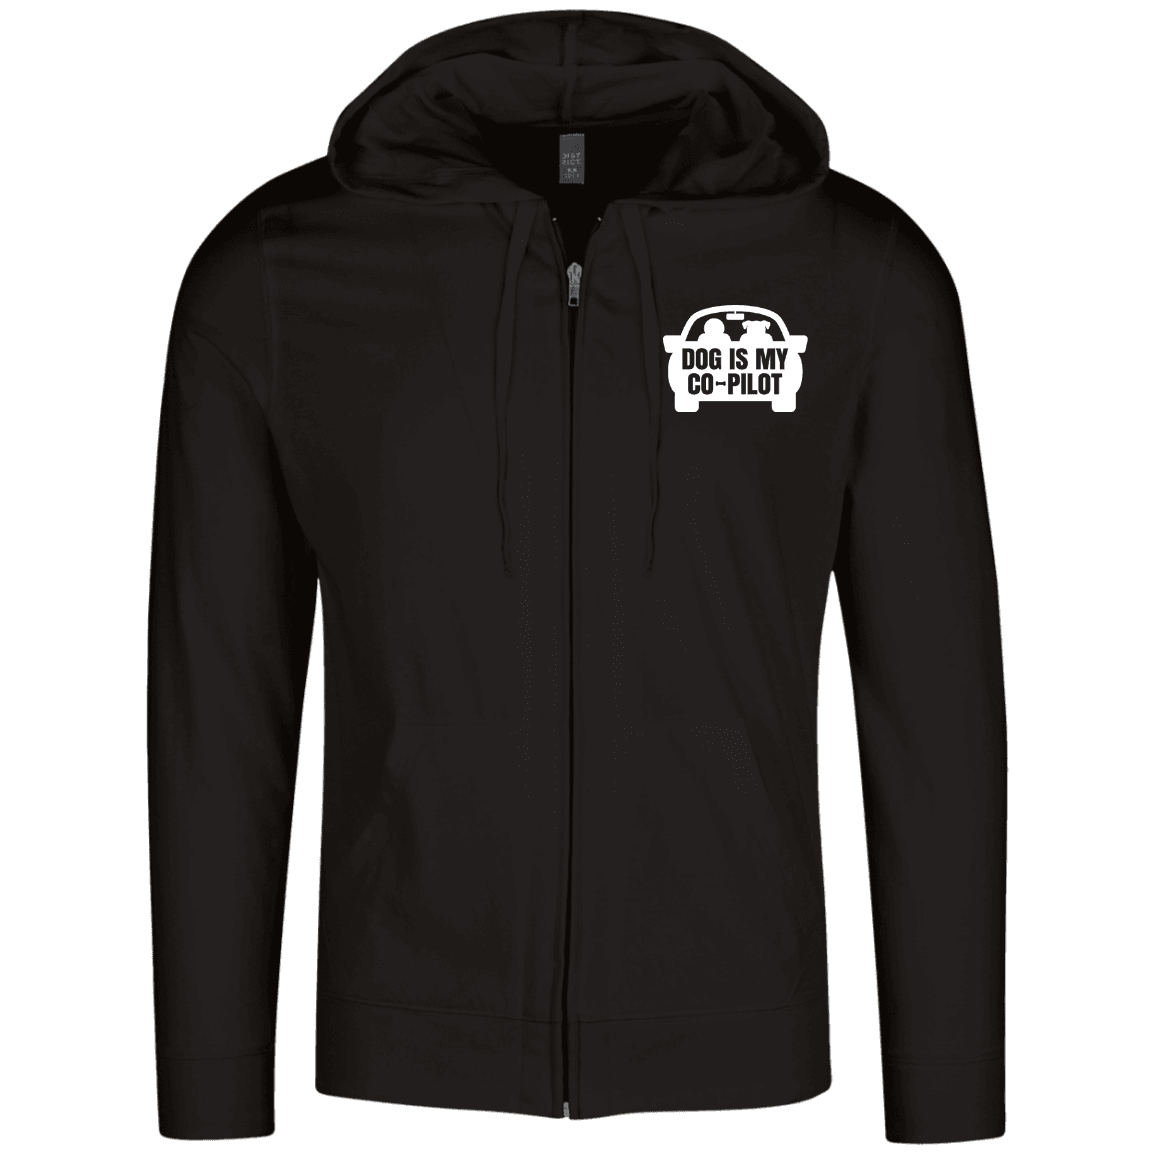 Designs by MyUtopia Shout Out:Dog is My Co-Pilot Embroidered Lightweight Full Zip Hoodie,Black / X-Small,Sweatshirts